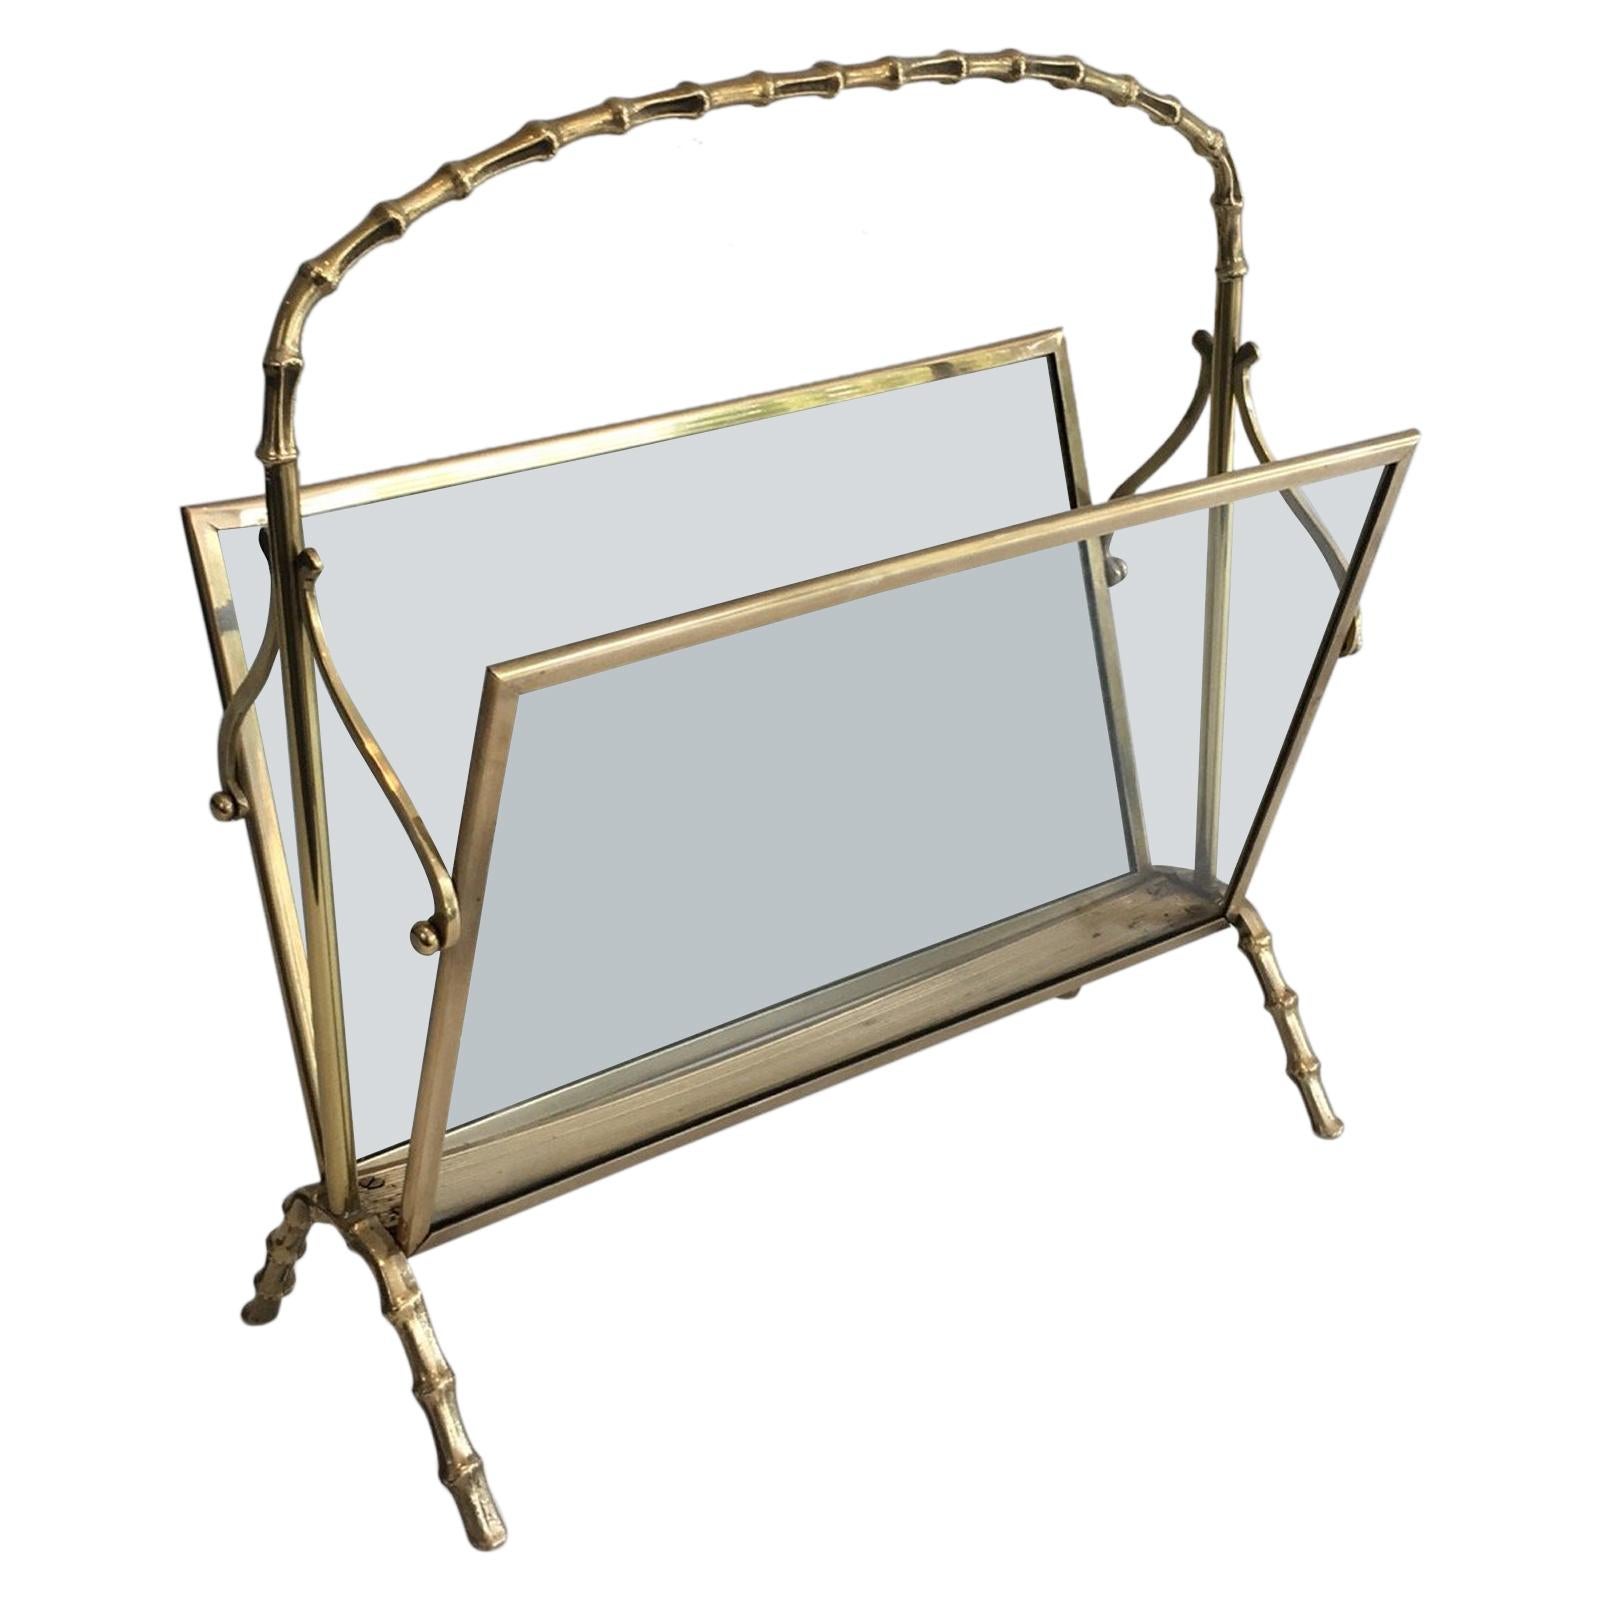 Maison Bagués, Bronze and Glass Faux-Bamboo Magazine Rack, French, circa 1940